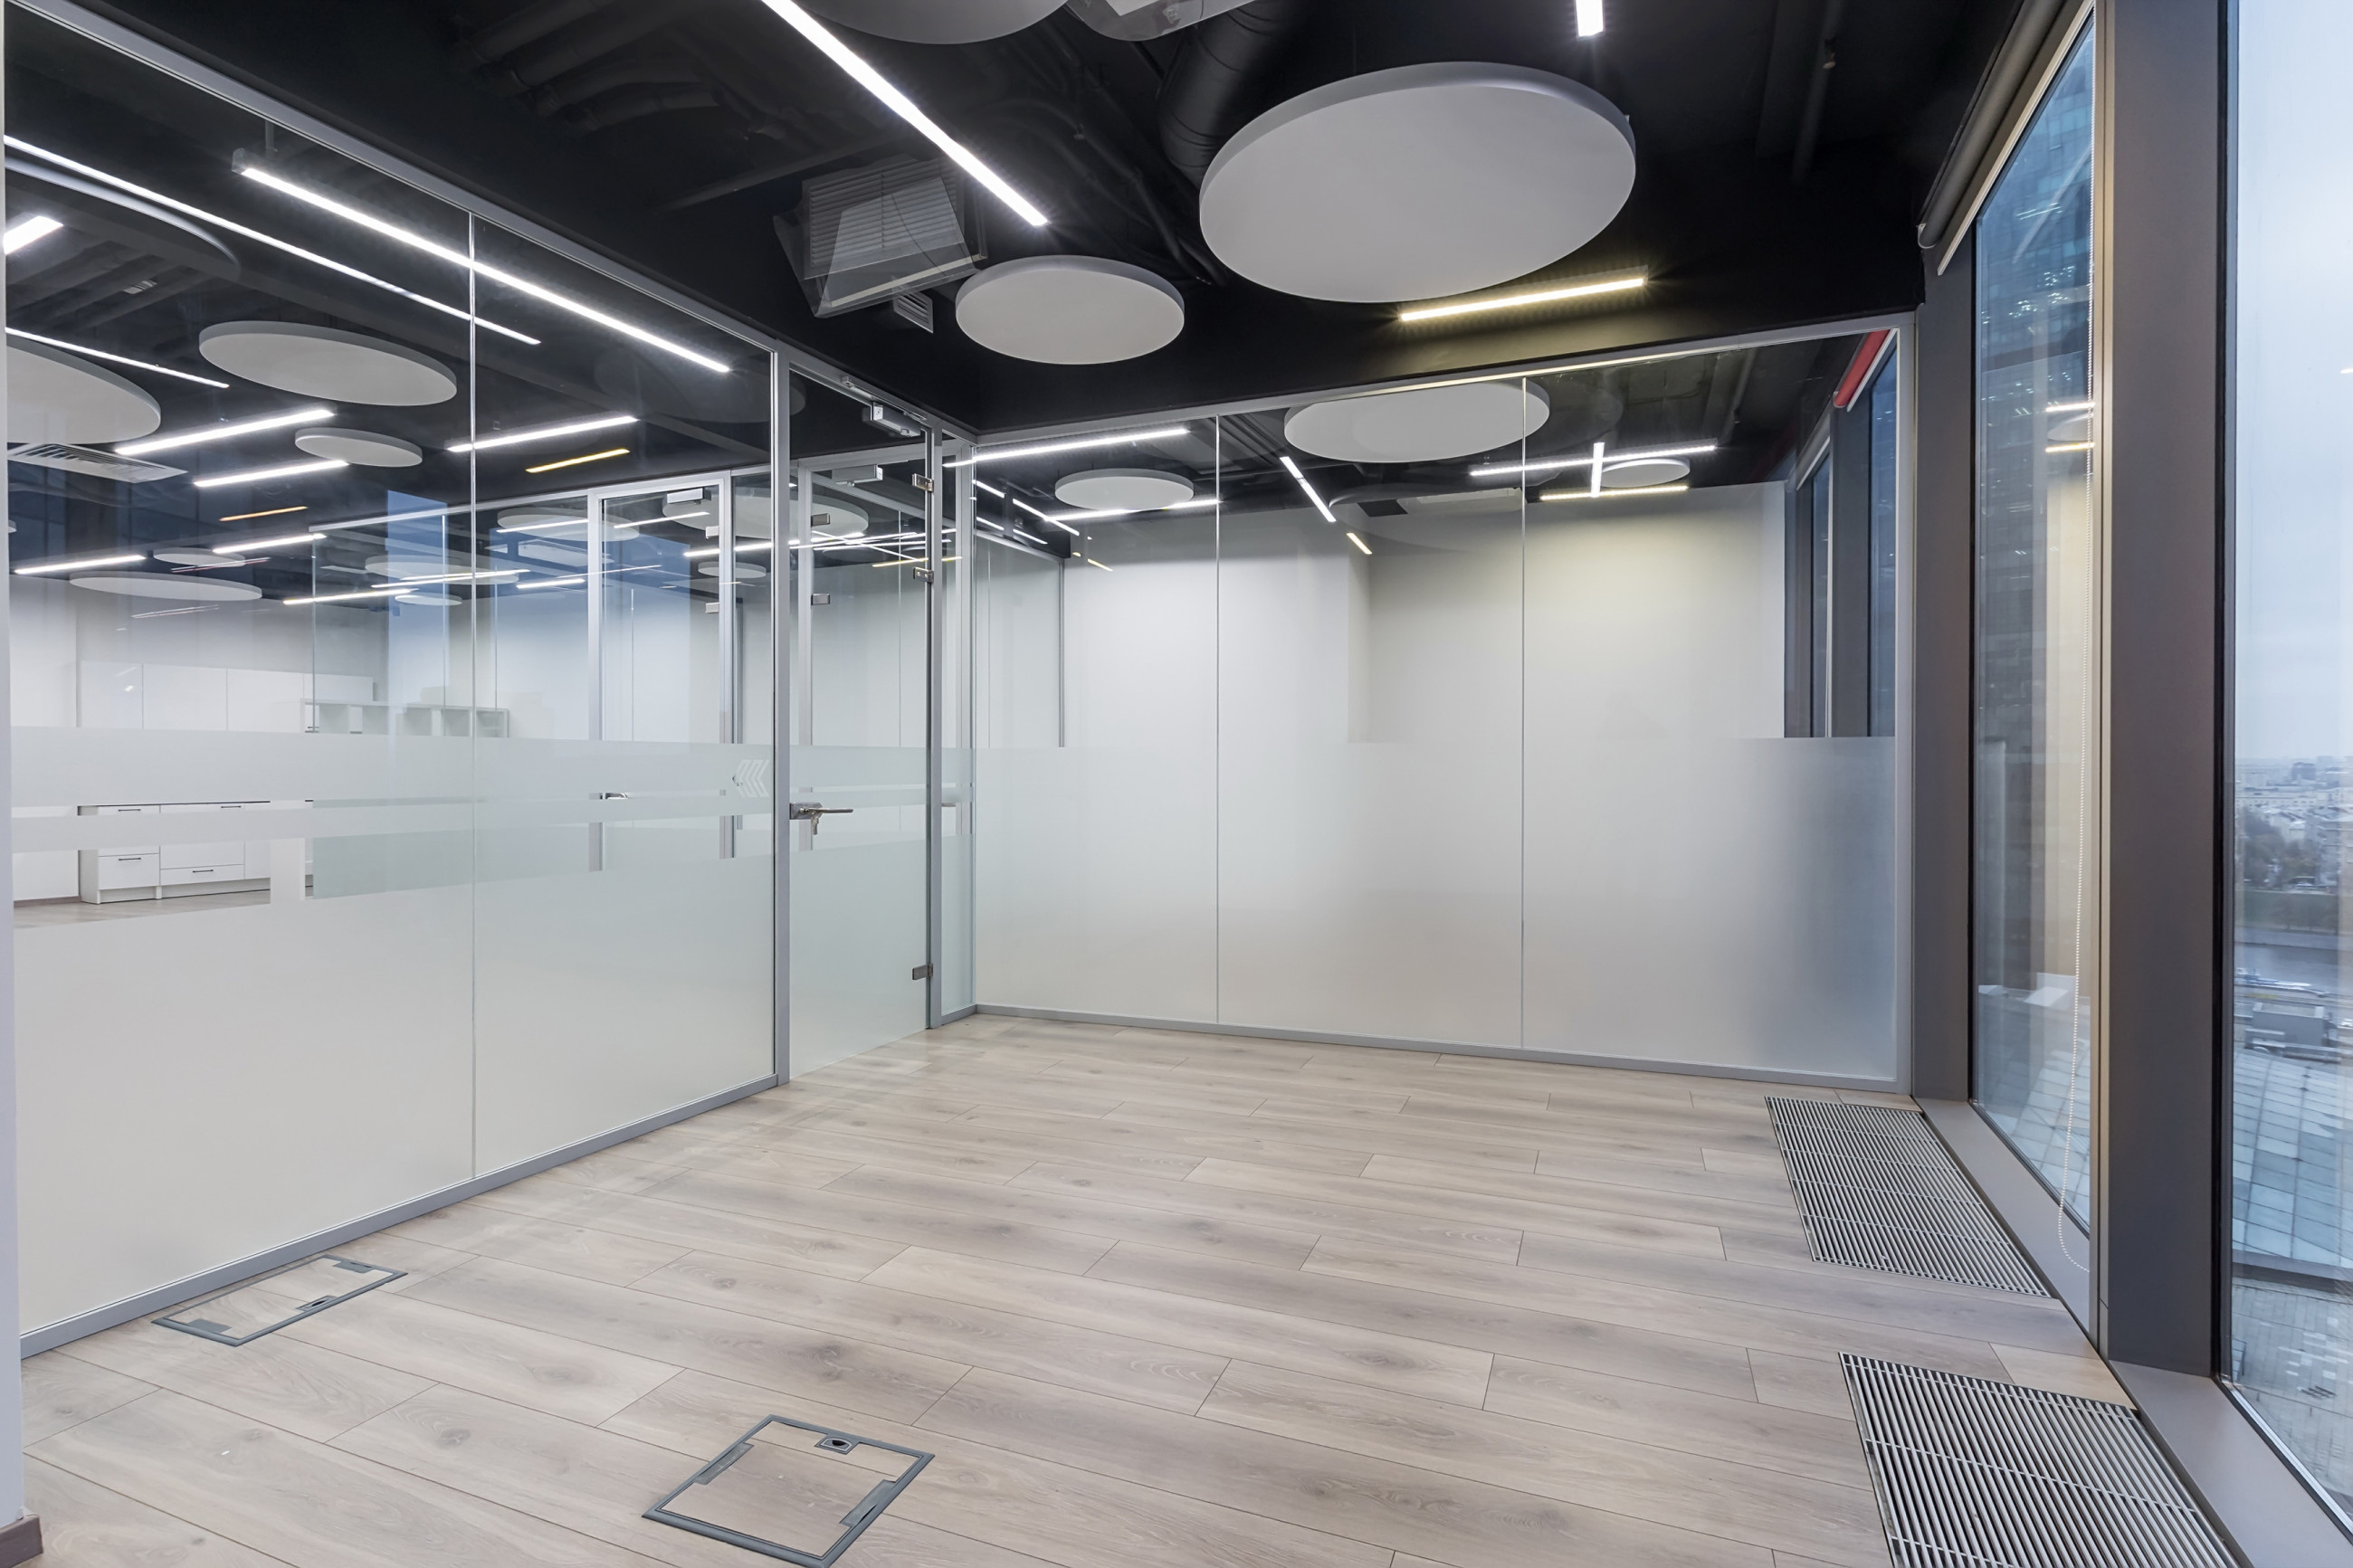 Commercial office space with frosted glass walls